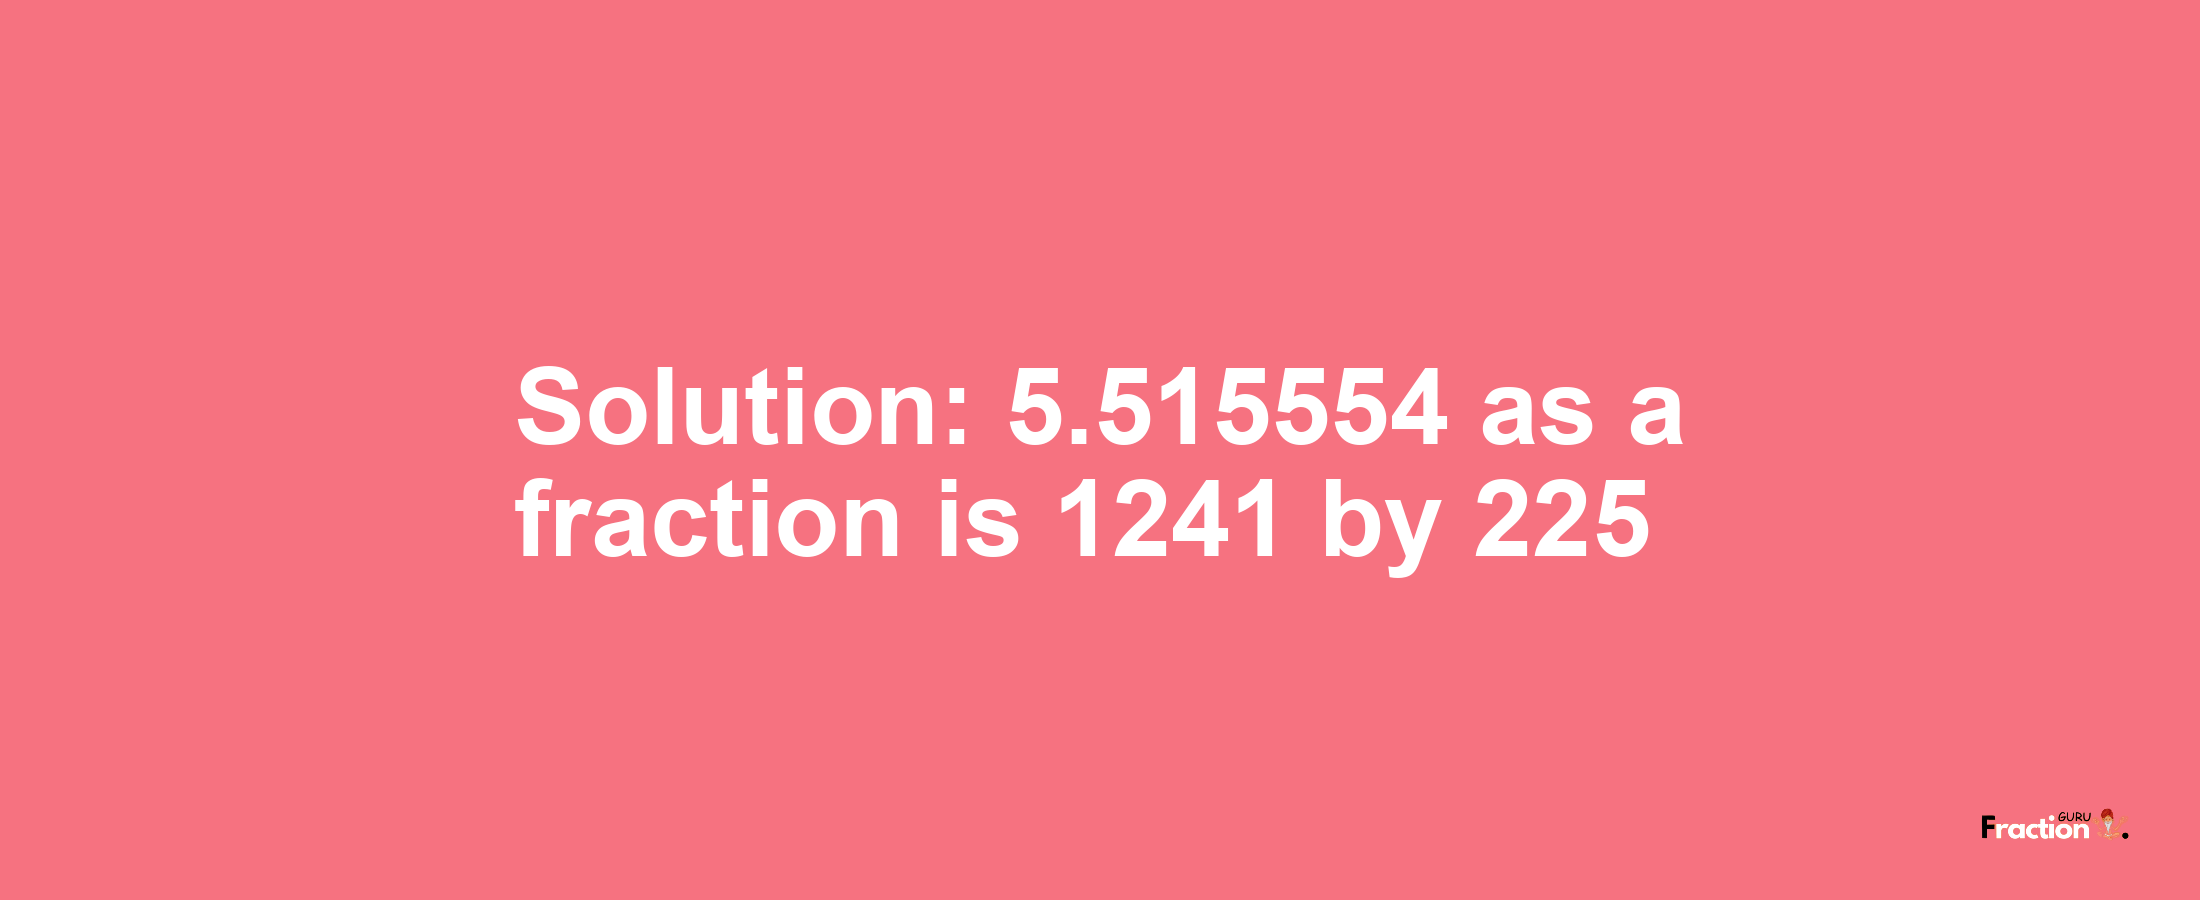 Solution:5.515554 as a fraction is 1241/225